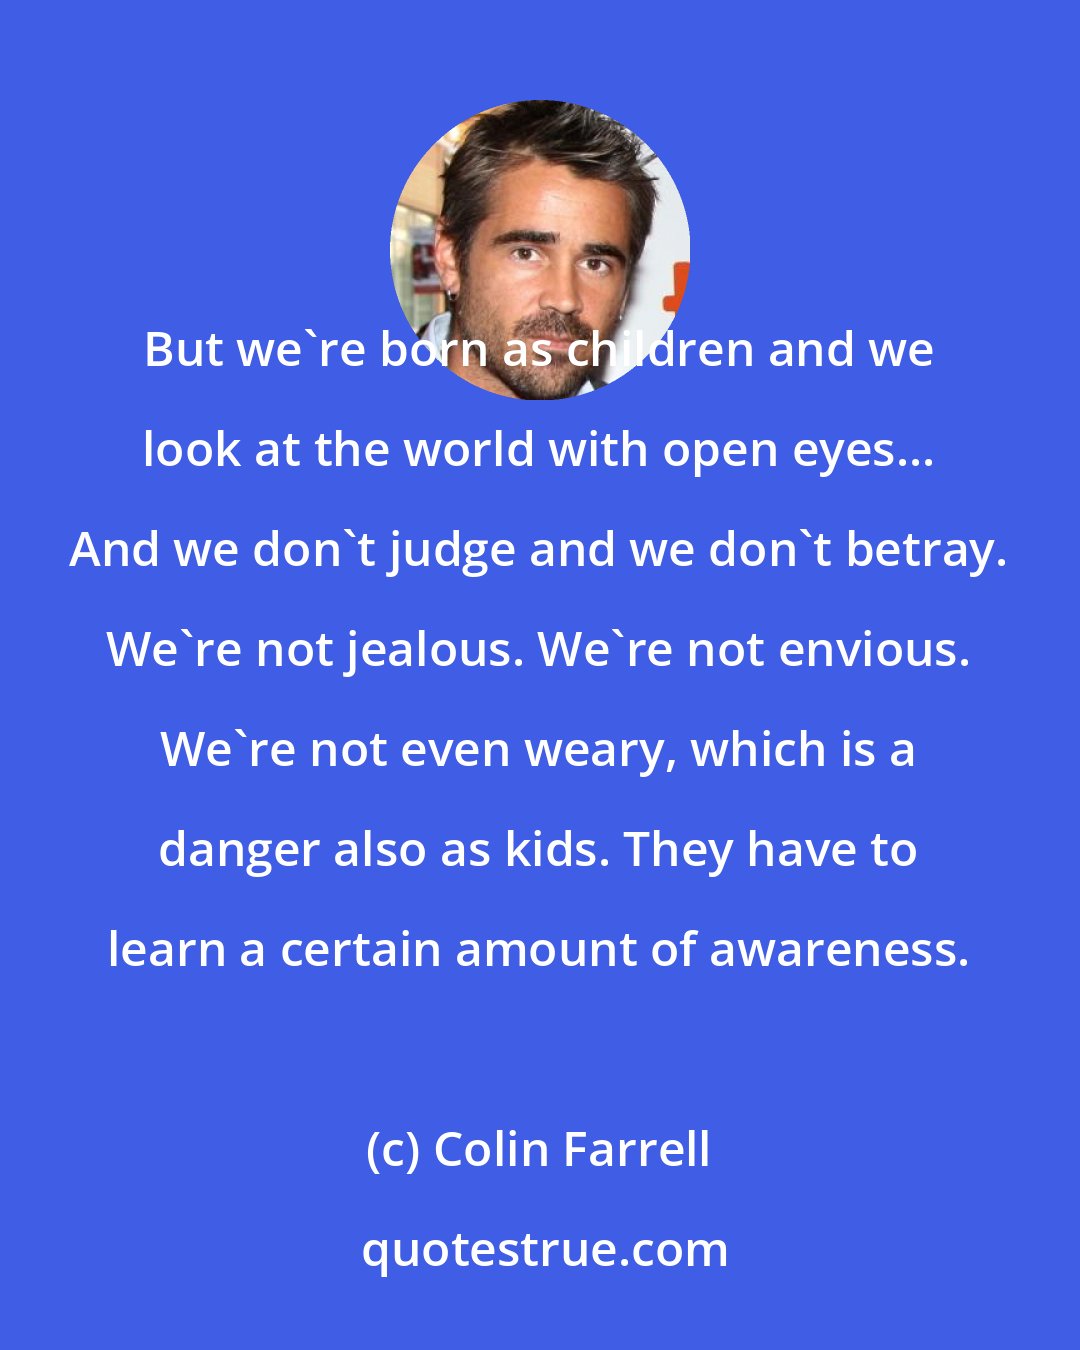 Colin Farrell: But we're born as children and we look at the world with open eyes... And we don't judge and we don't betray. We're not jealous. We're not envious. We're not even weary, which is a danger also as kids. They have to learn a certain amount of awareness.